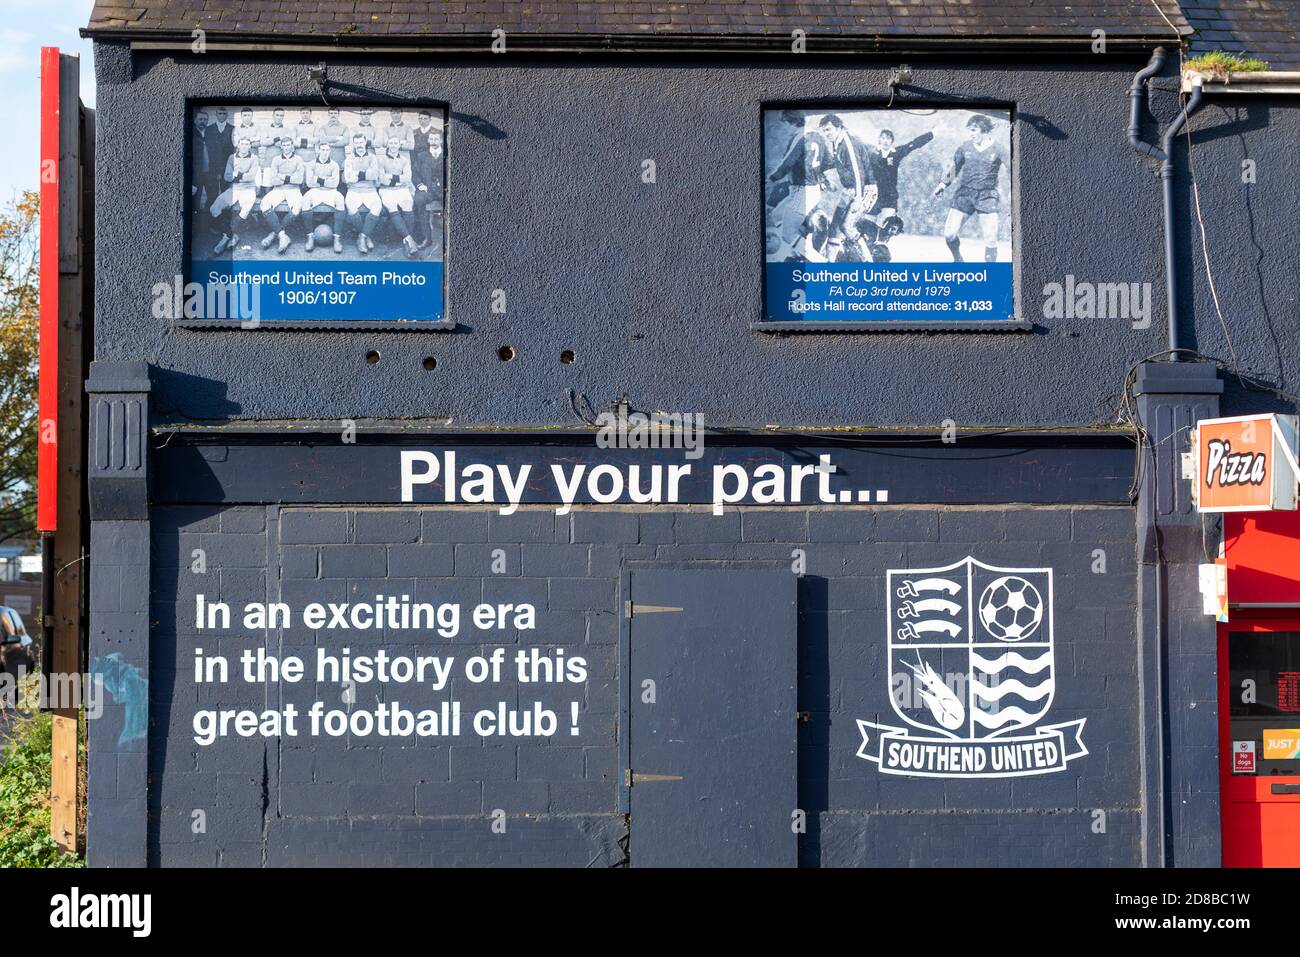 Historic photographs and a message for an exciting future on vacant property at Roots Hall football ground of Southend United football club, Essex, UK Stock Photo